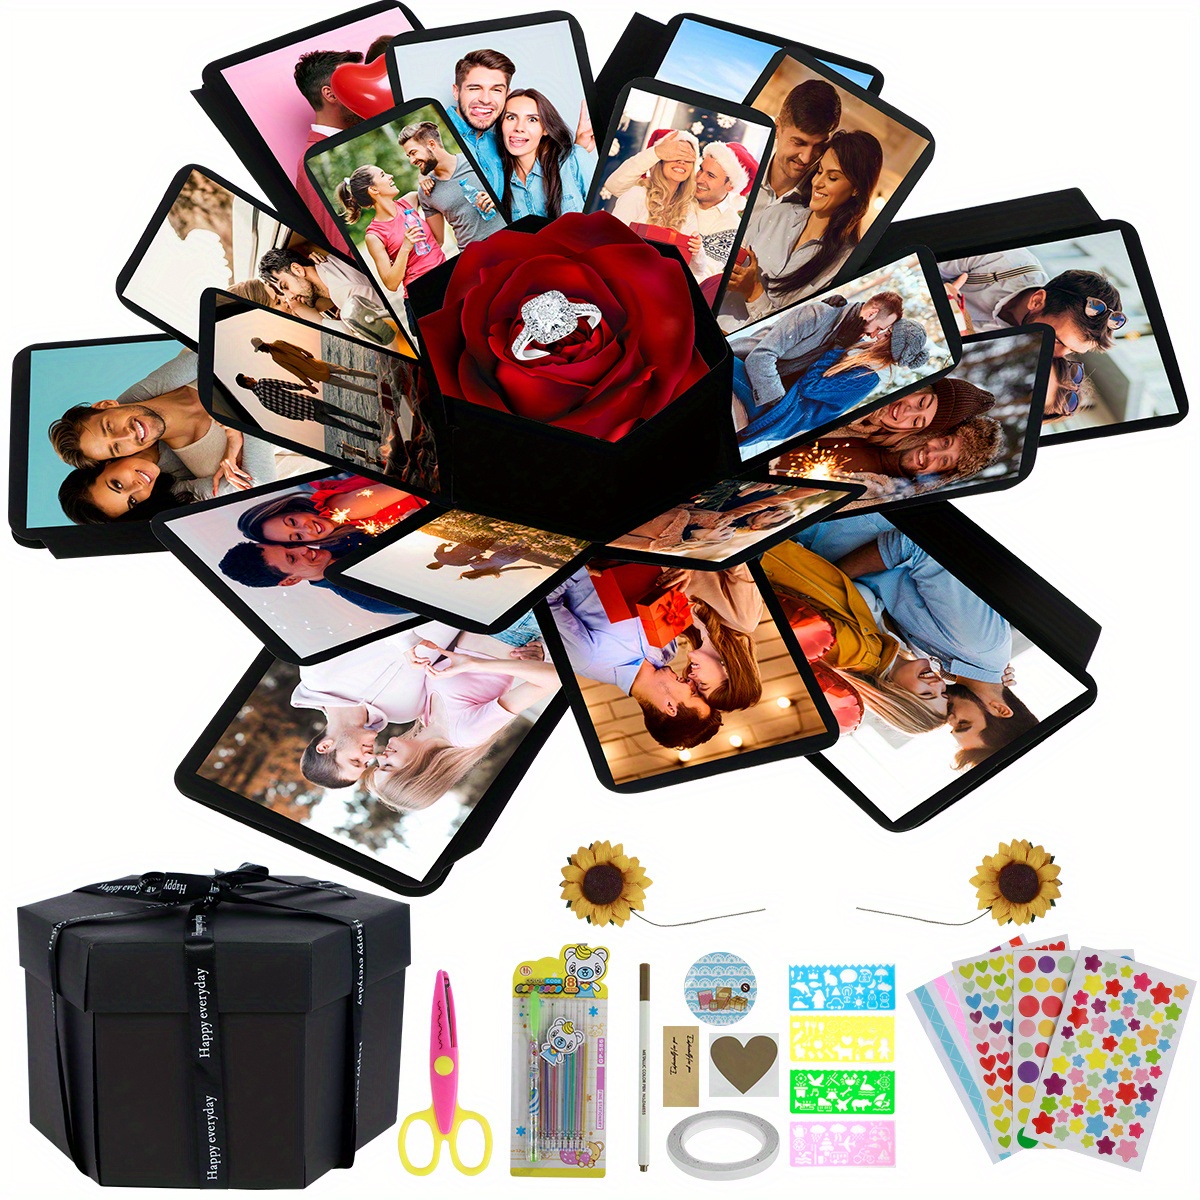  Wanateber Explosion Box, DIY Explosion Gift Box Assembled  Handmade Big Photo Box with 6 Faces for Birthday Gift, Mother's Day,  Wedding or Valentine's Day (Black) : Home & Kitchen